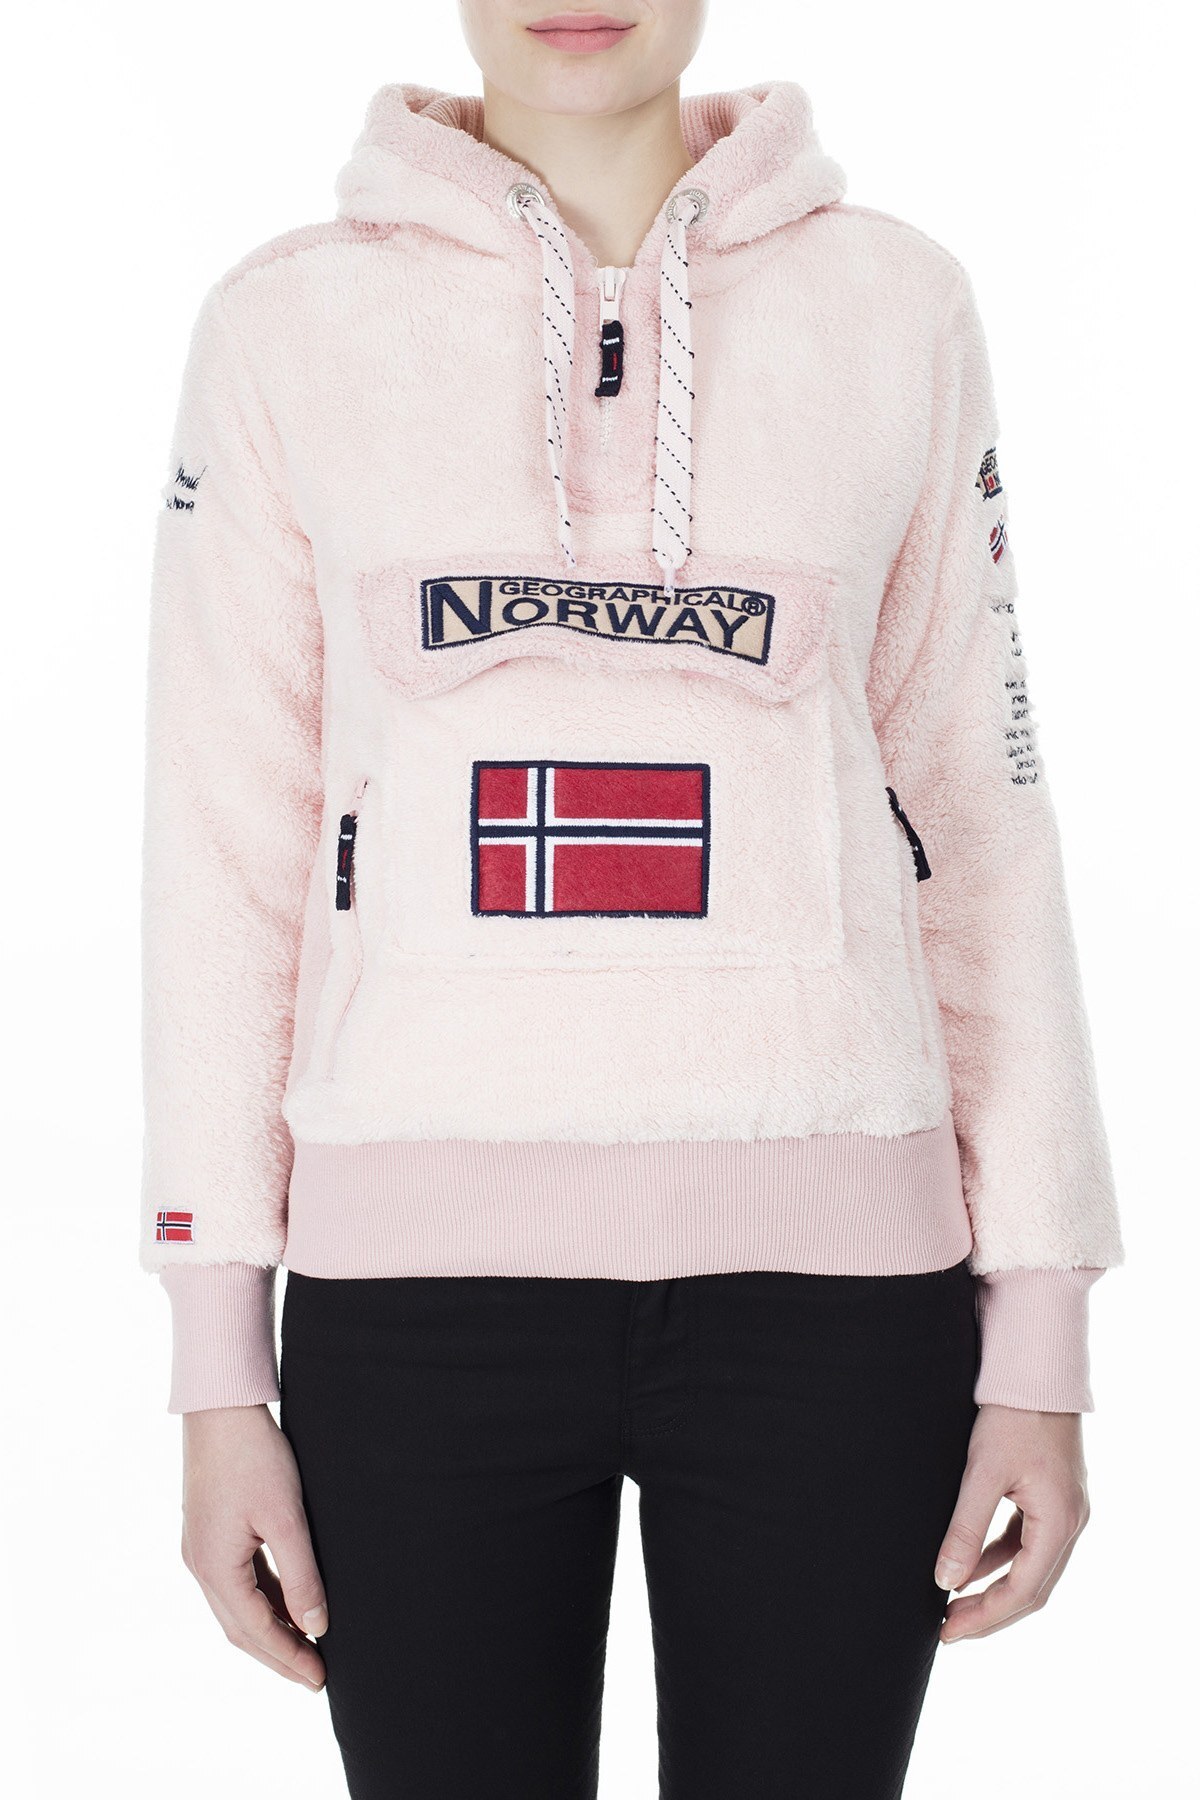 Norway Geographical Outdoor Bayan Sweat GYMCLASS PEMBE